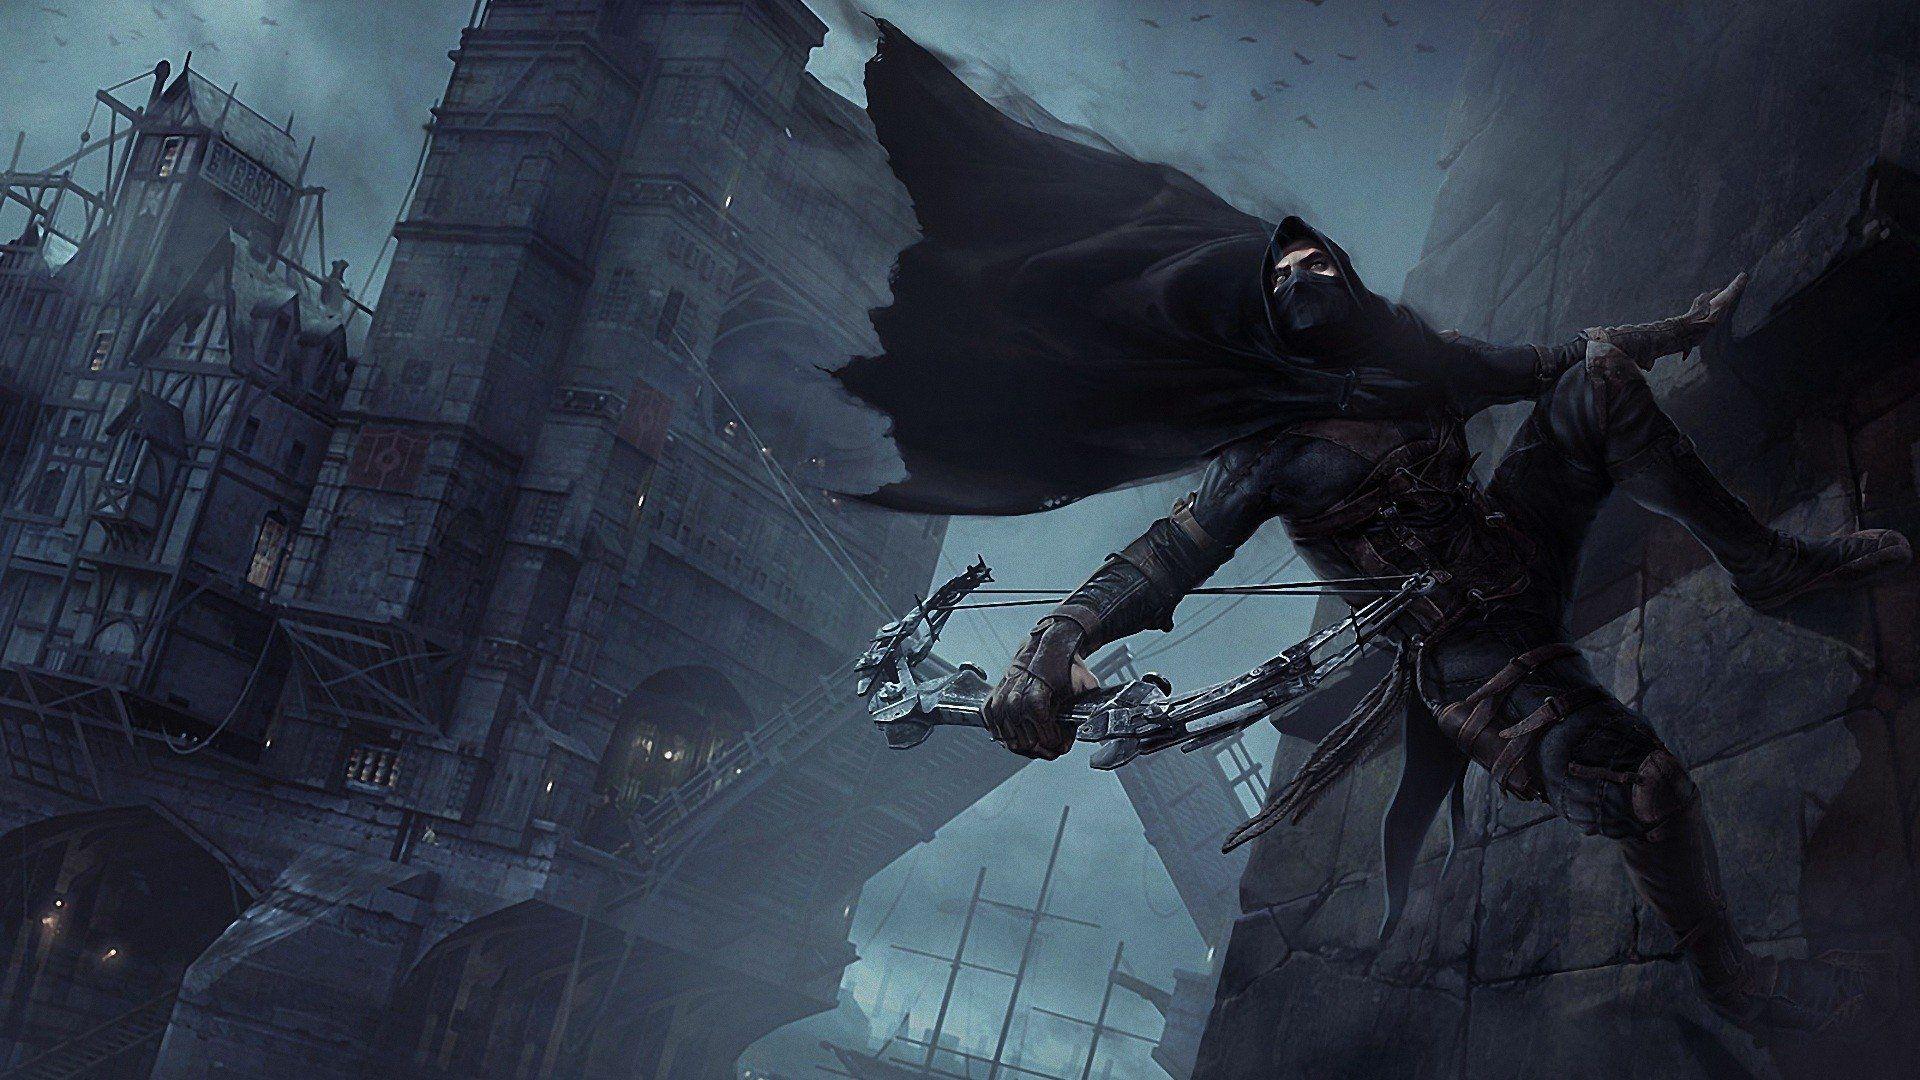 Thief HD Wallpaper and Background Image